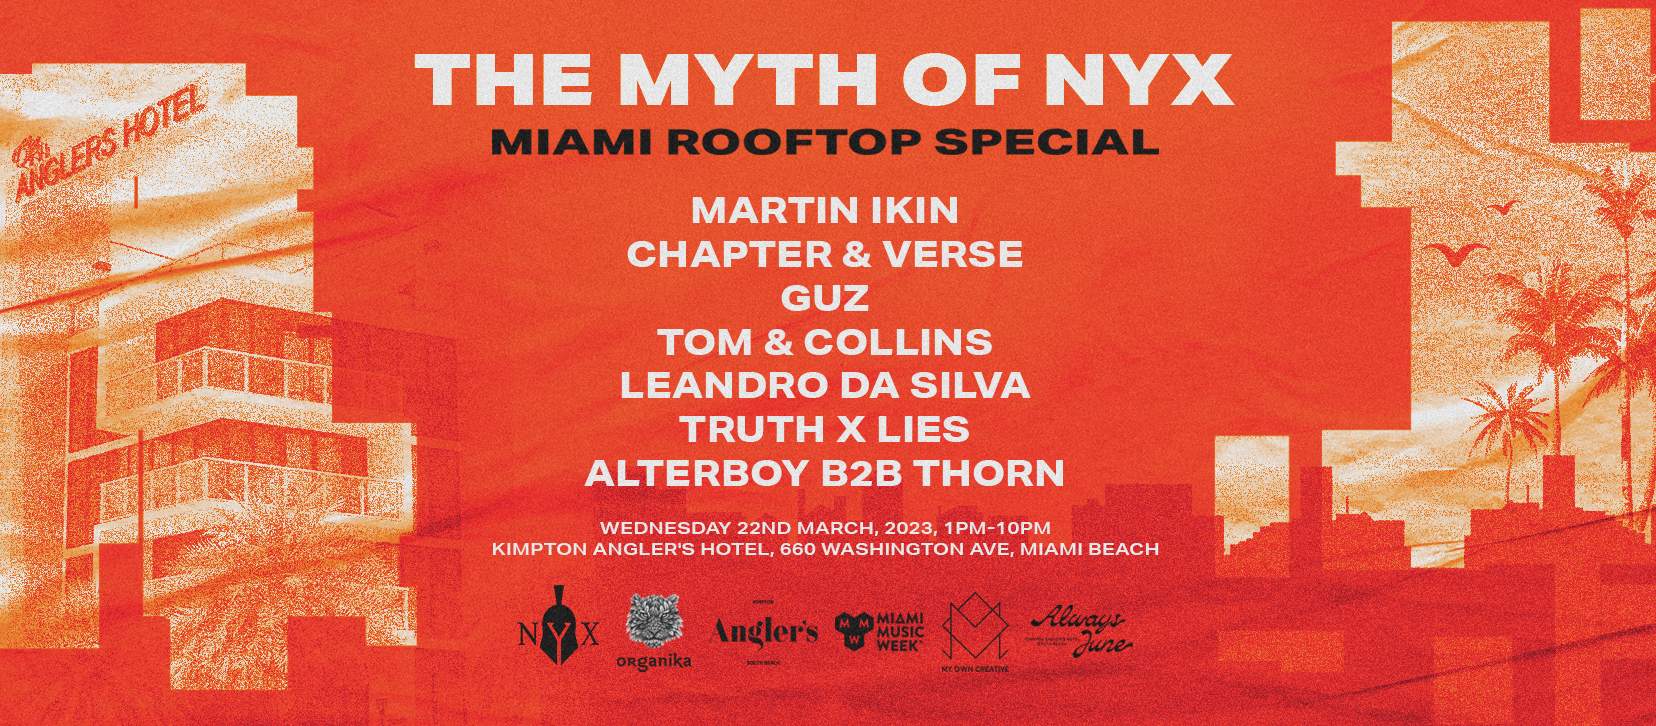 The Myth of NYX - Miami Music Week - Rooftop Special - フライヤー表